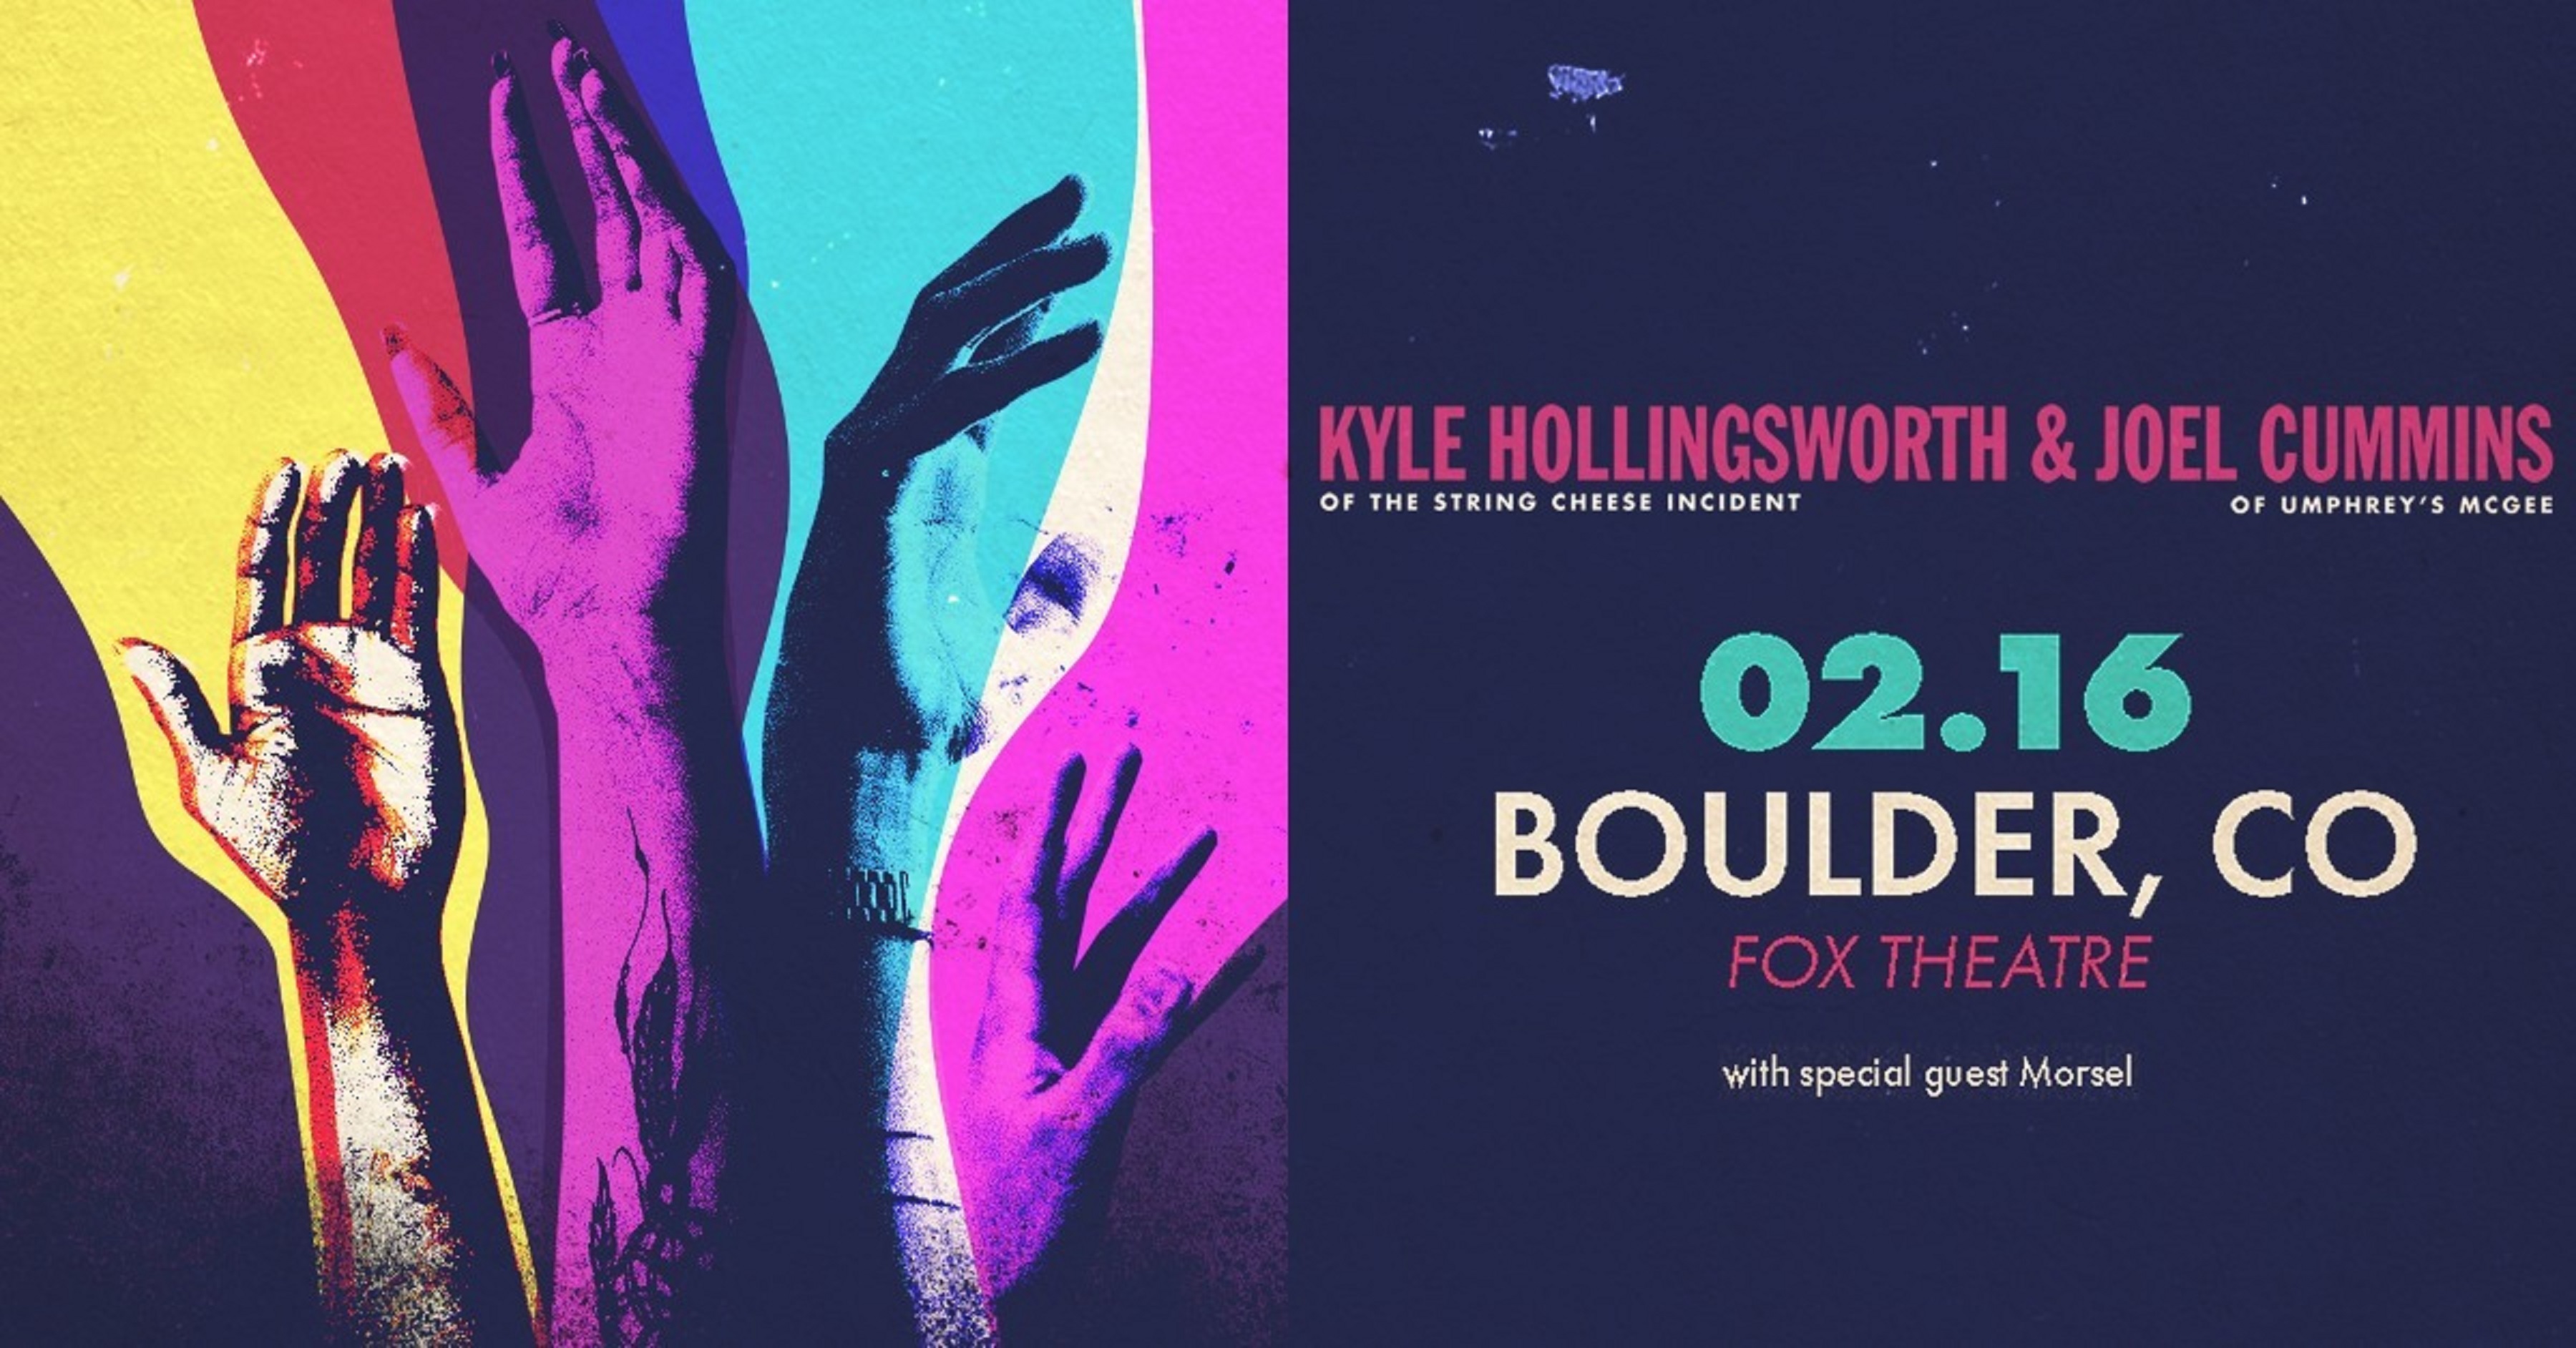 KYLE HOLLINGSWORTH BAND & JOEL CUMMINS will play The Fox Theatre in Boulder